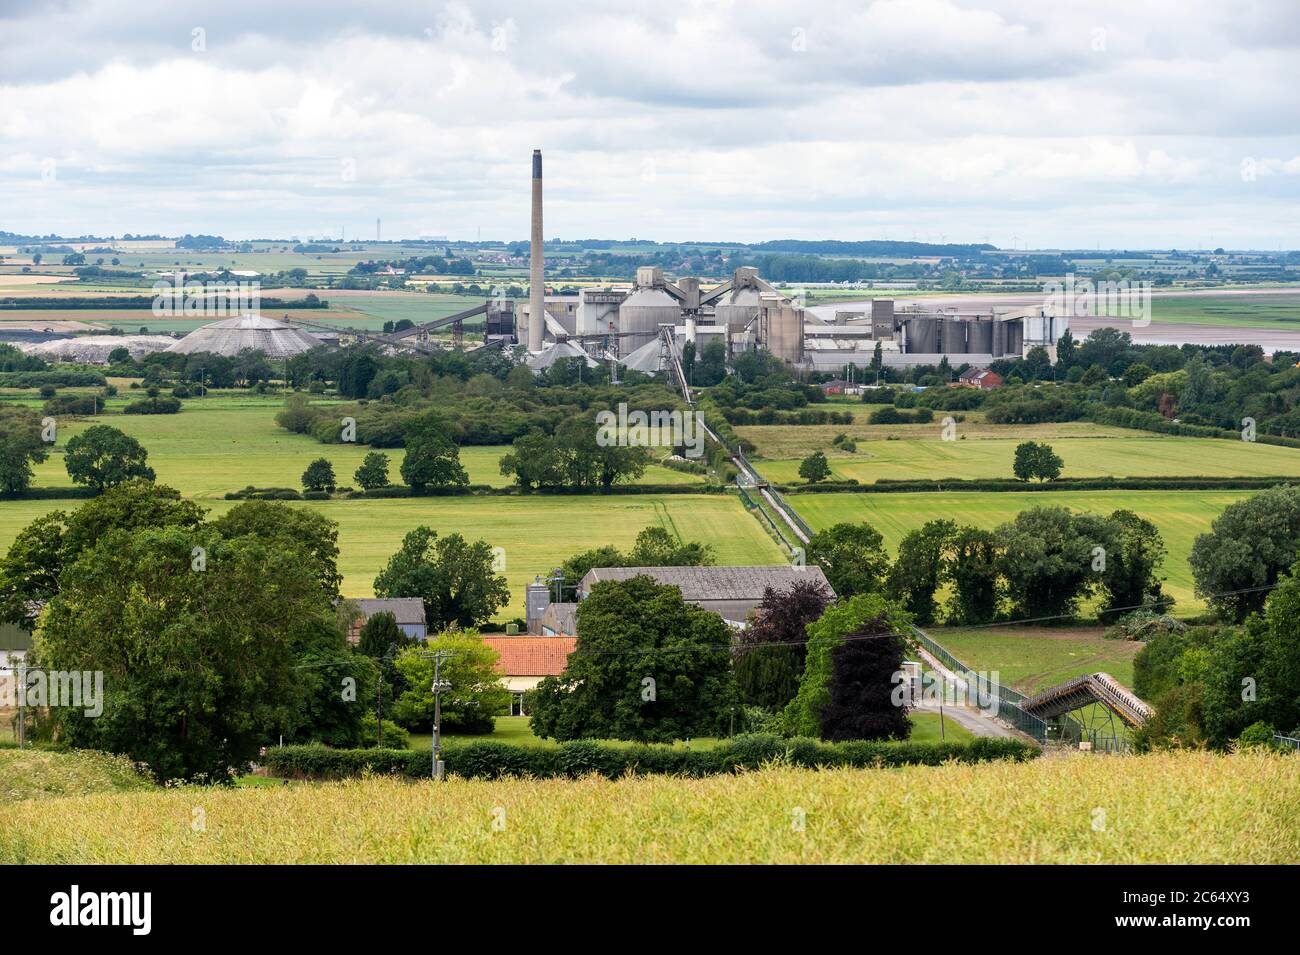 Cemex Cement plant at South Ferriby in North Lincolnshire is beginning its shutdown procedure to mothball the plant. Shown nestled in the countryside. Stock Photo